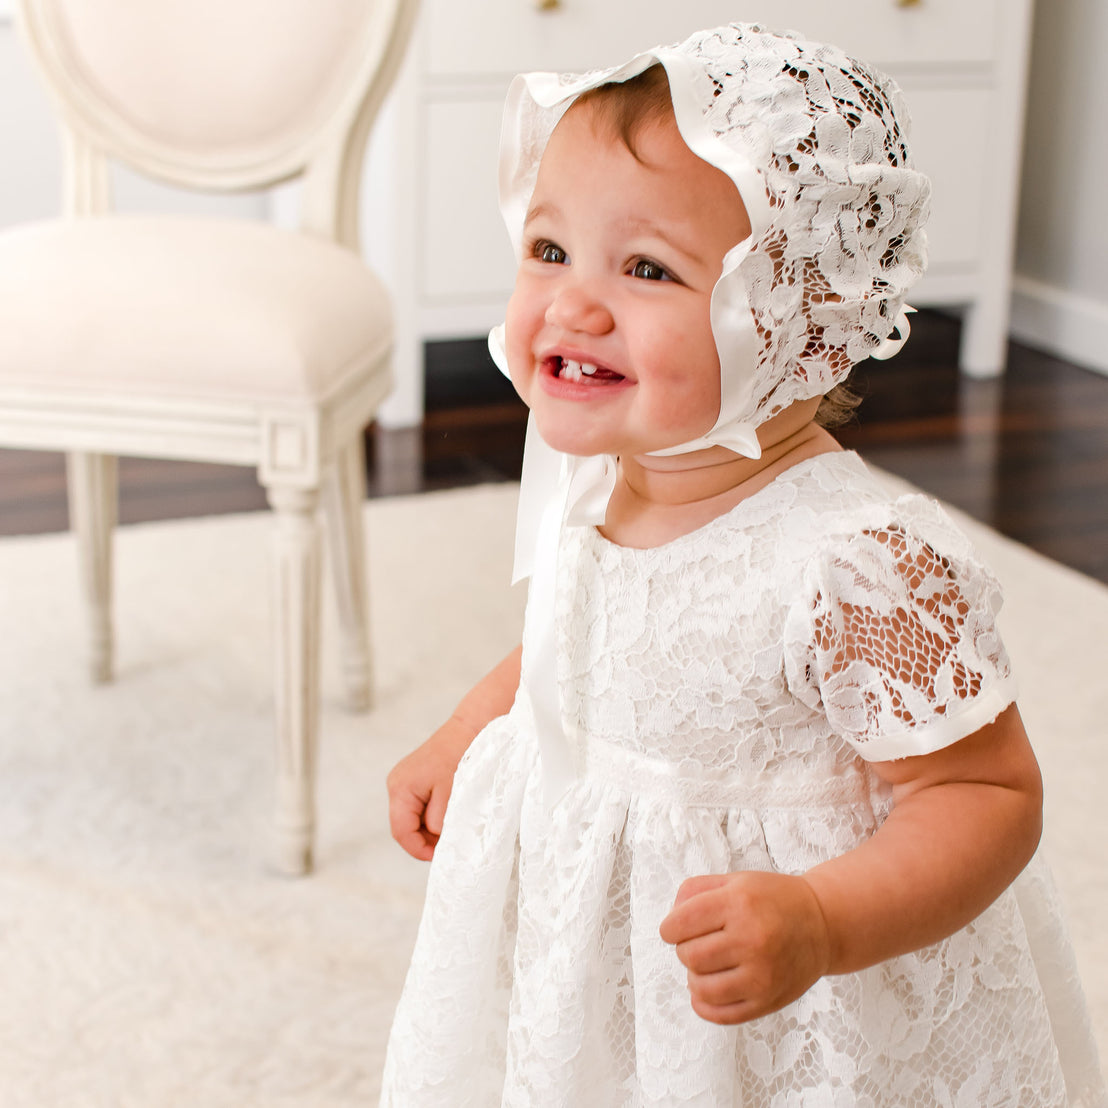 A joyful toddler in a traditional white lace dress and Rose Lace Bonnet smiles while standing on a hardwood floor with a vintage white chair in the background.